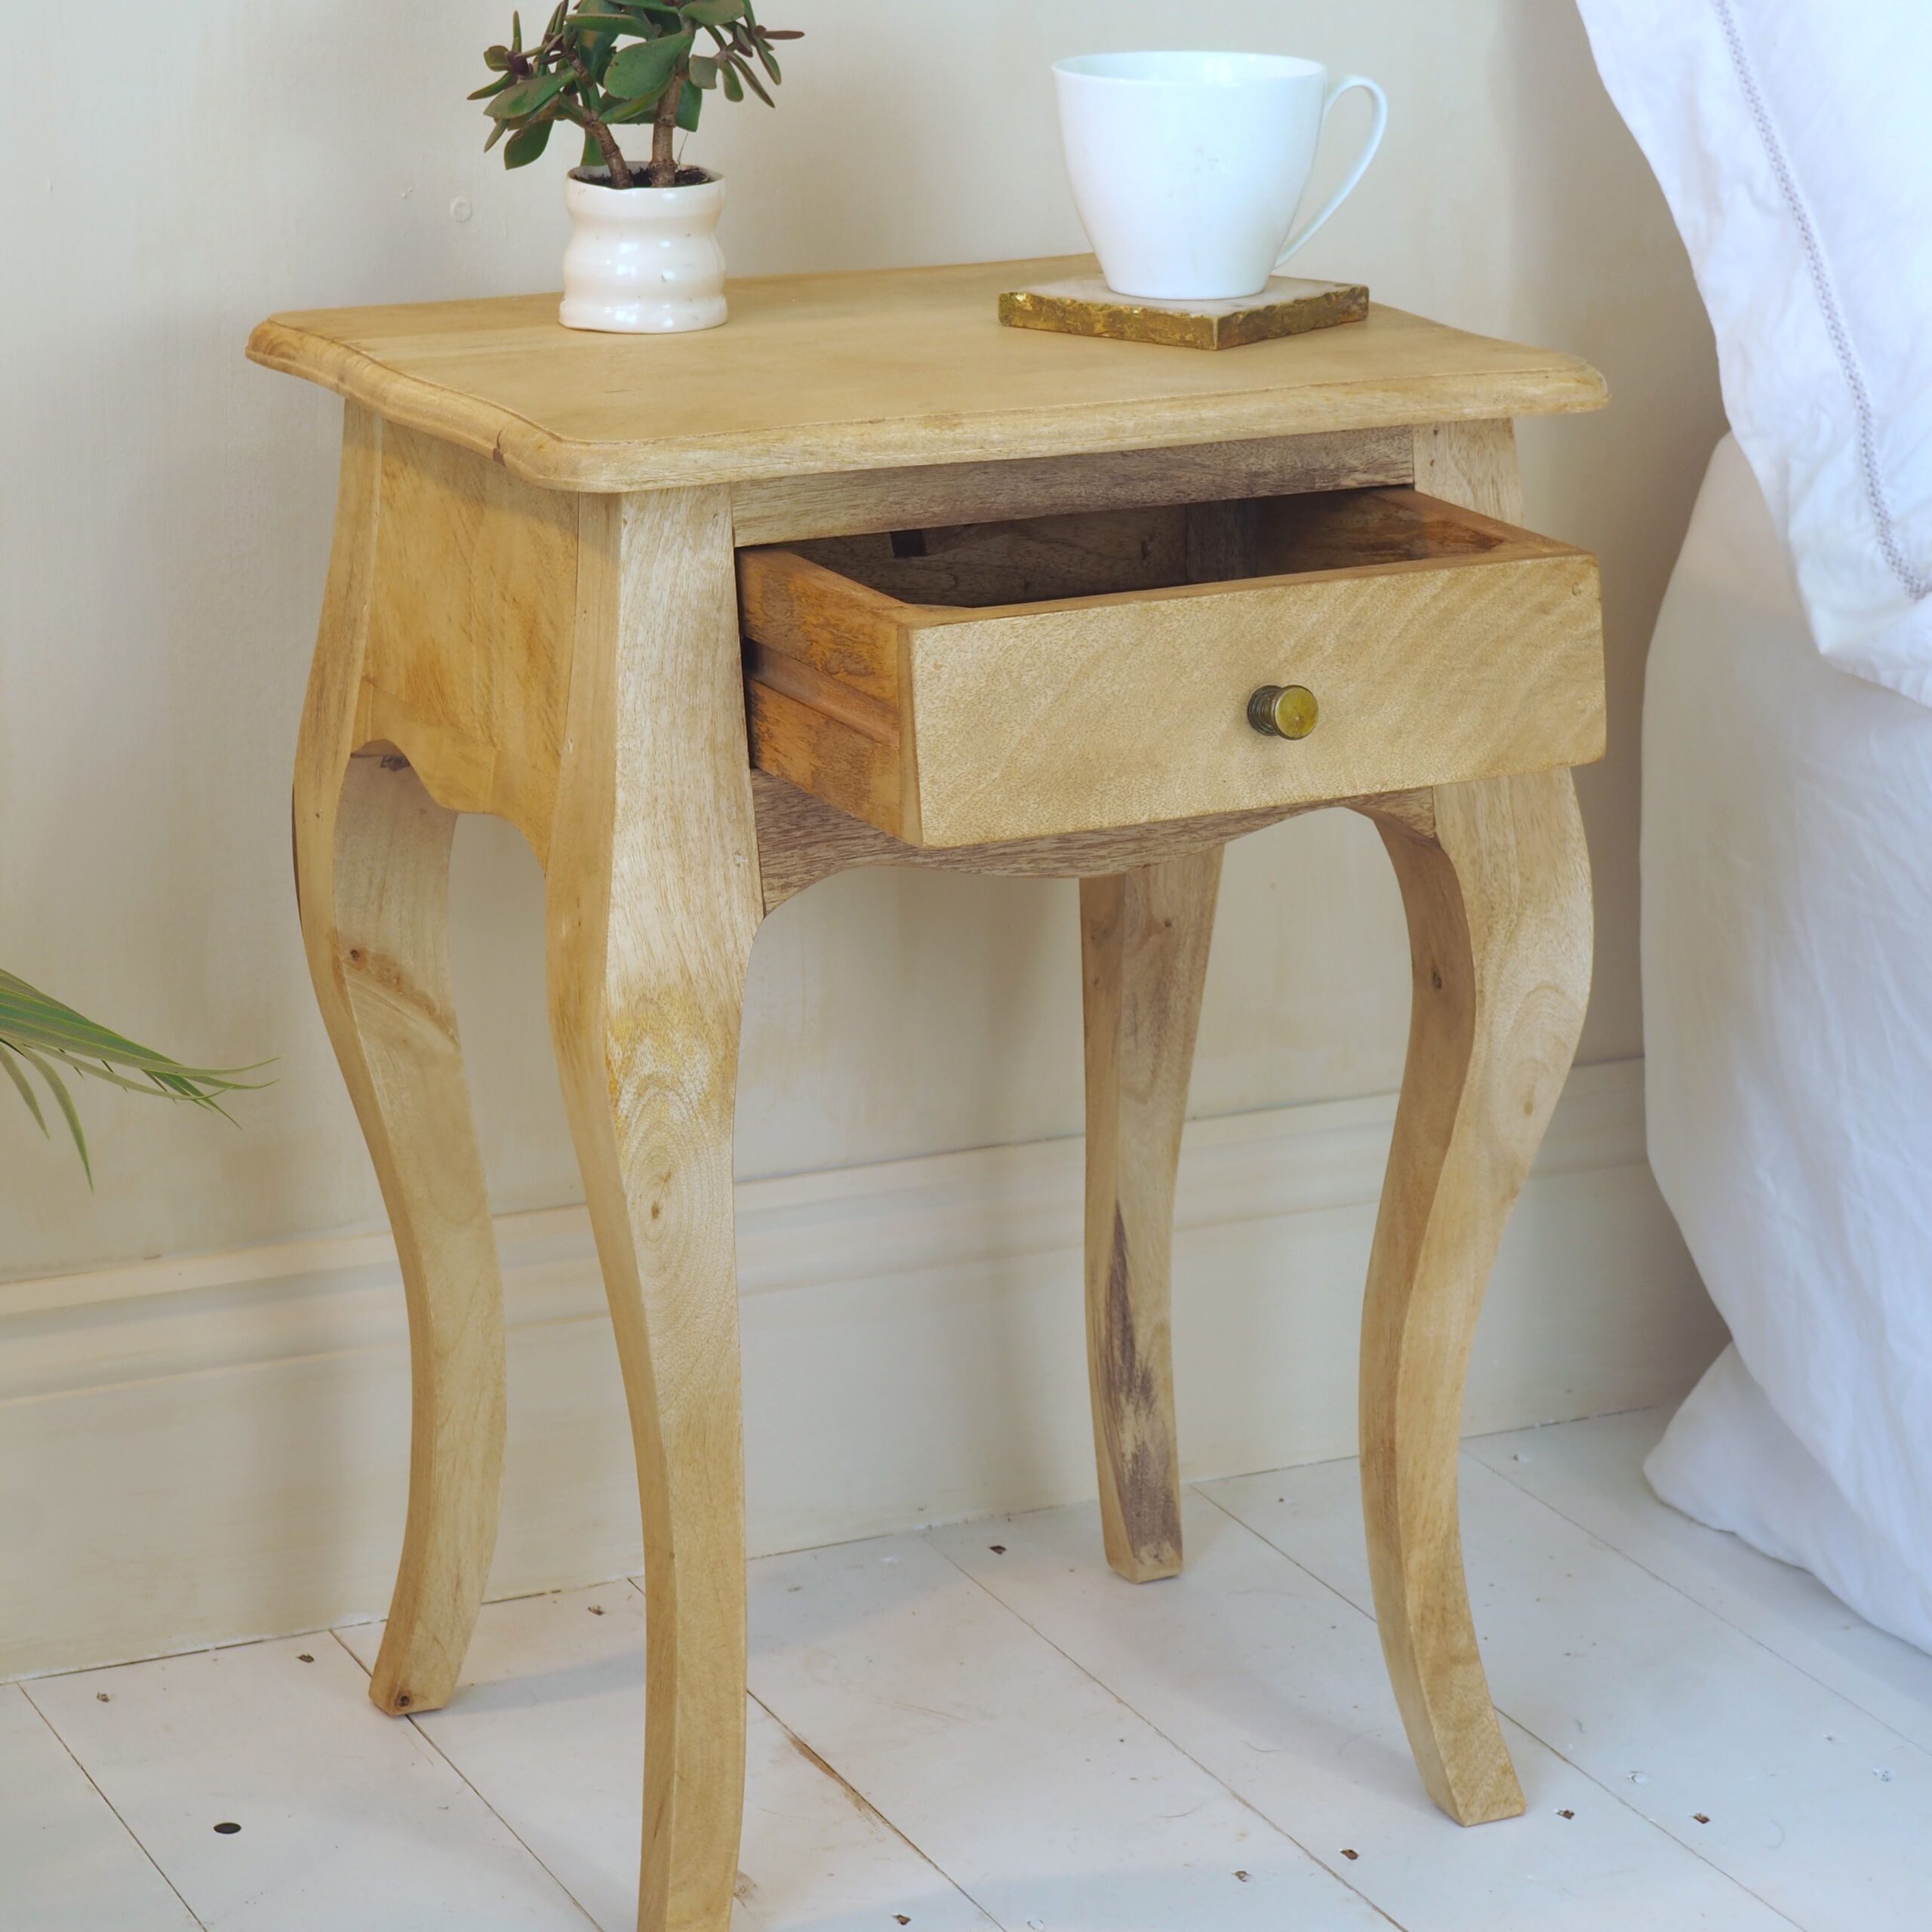 Natural Bedside Table with draw open, on white wooden floor in bedroom setting